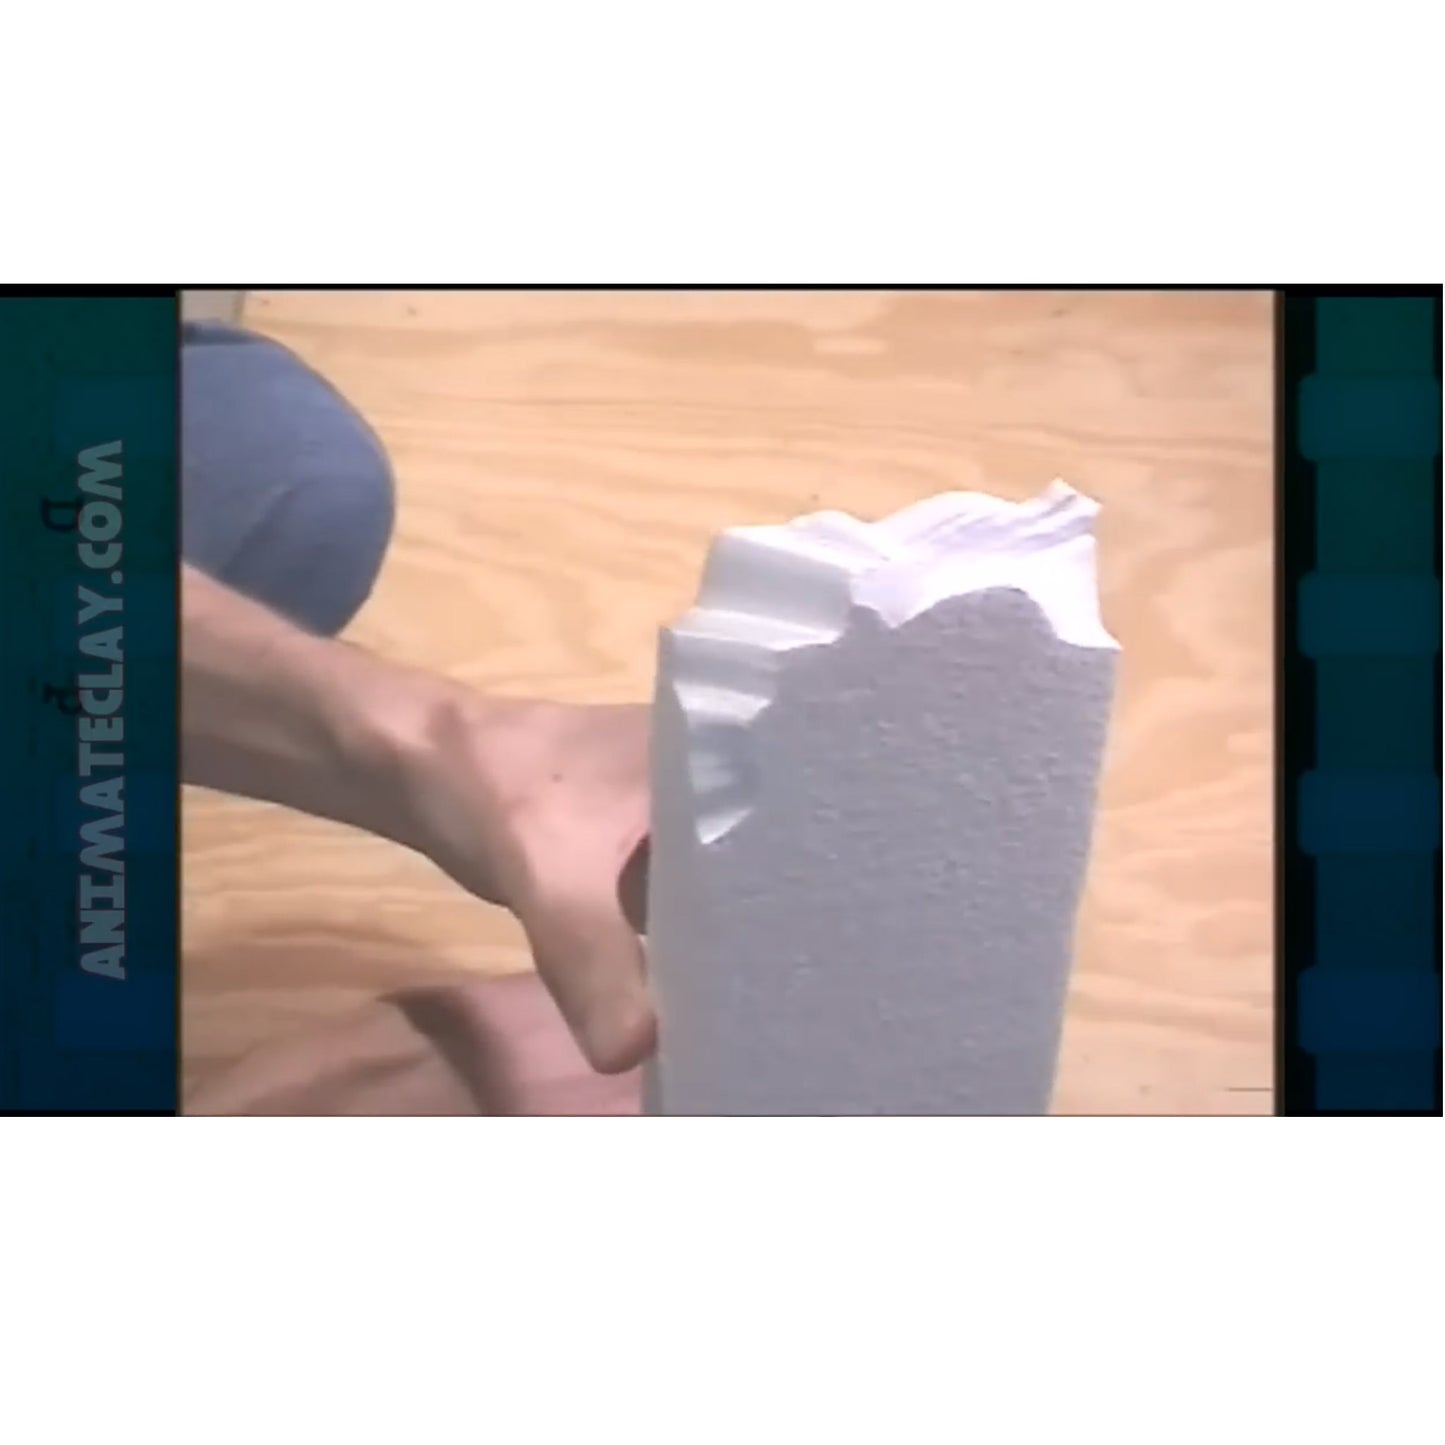 Marc shows what tools to use to cut styrofoam to get a clean finish.